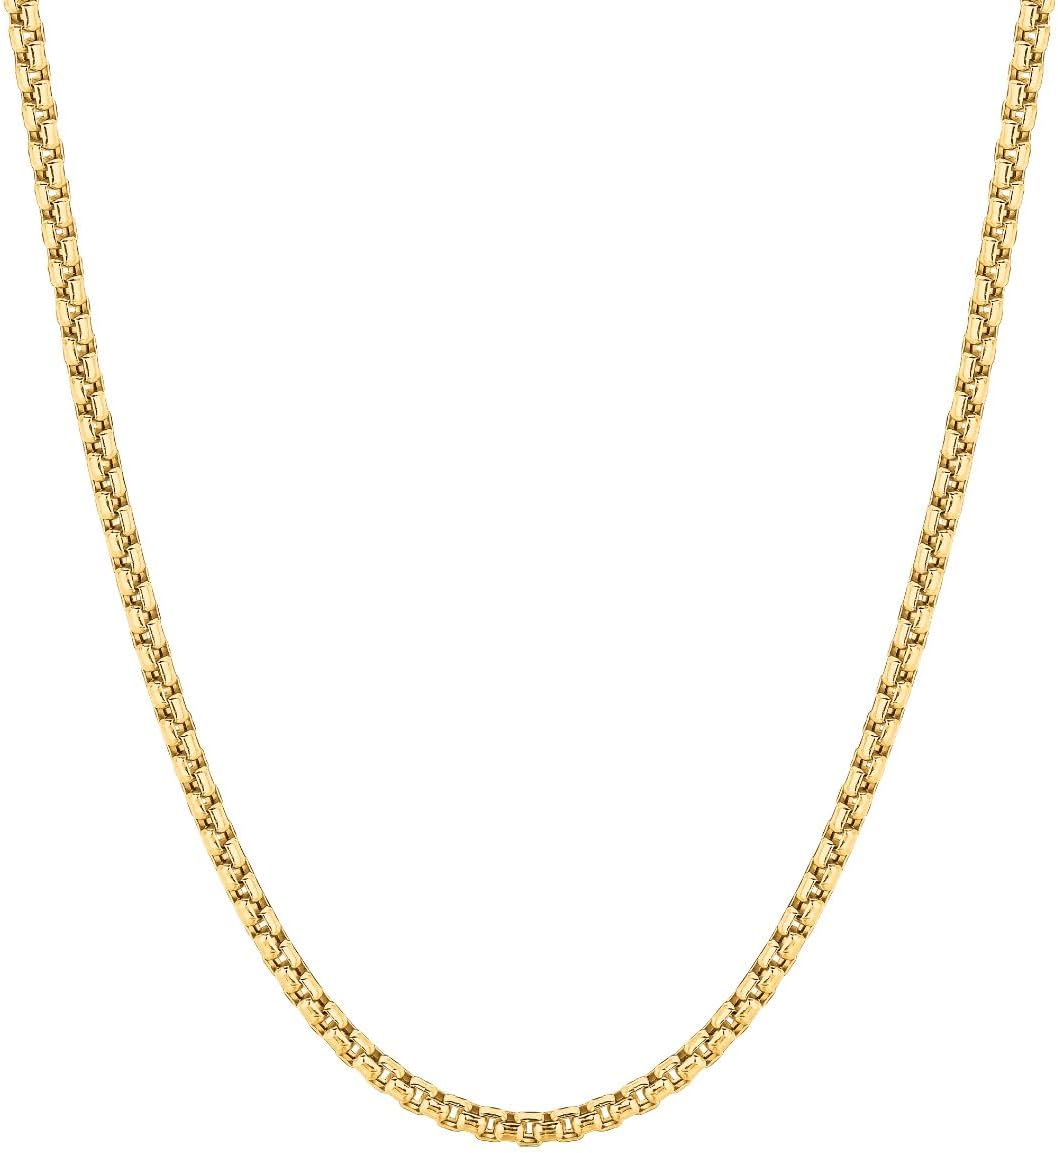 14k Yellow Gold 3.5mm Lite Round Box Chain Link Necklace